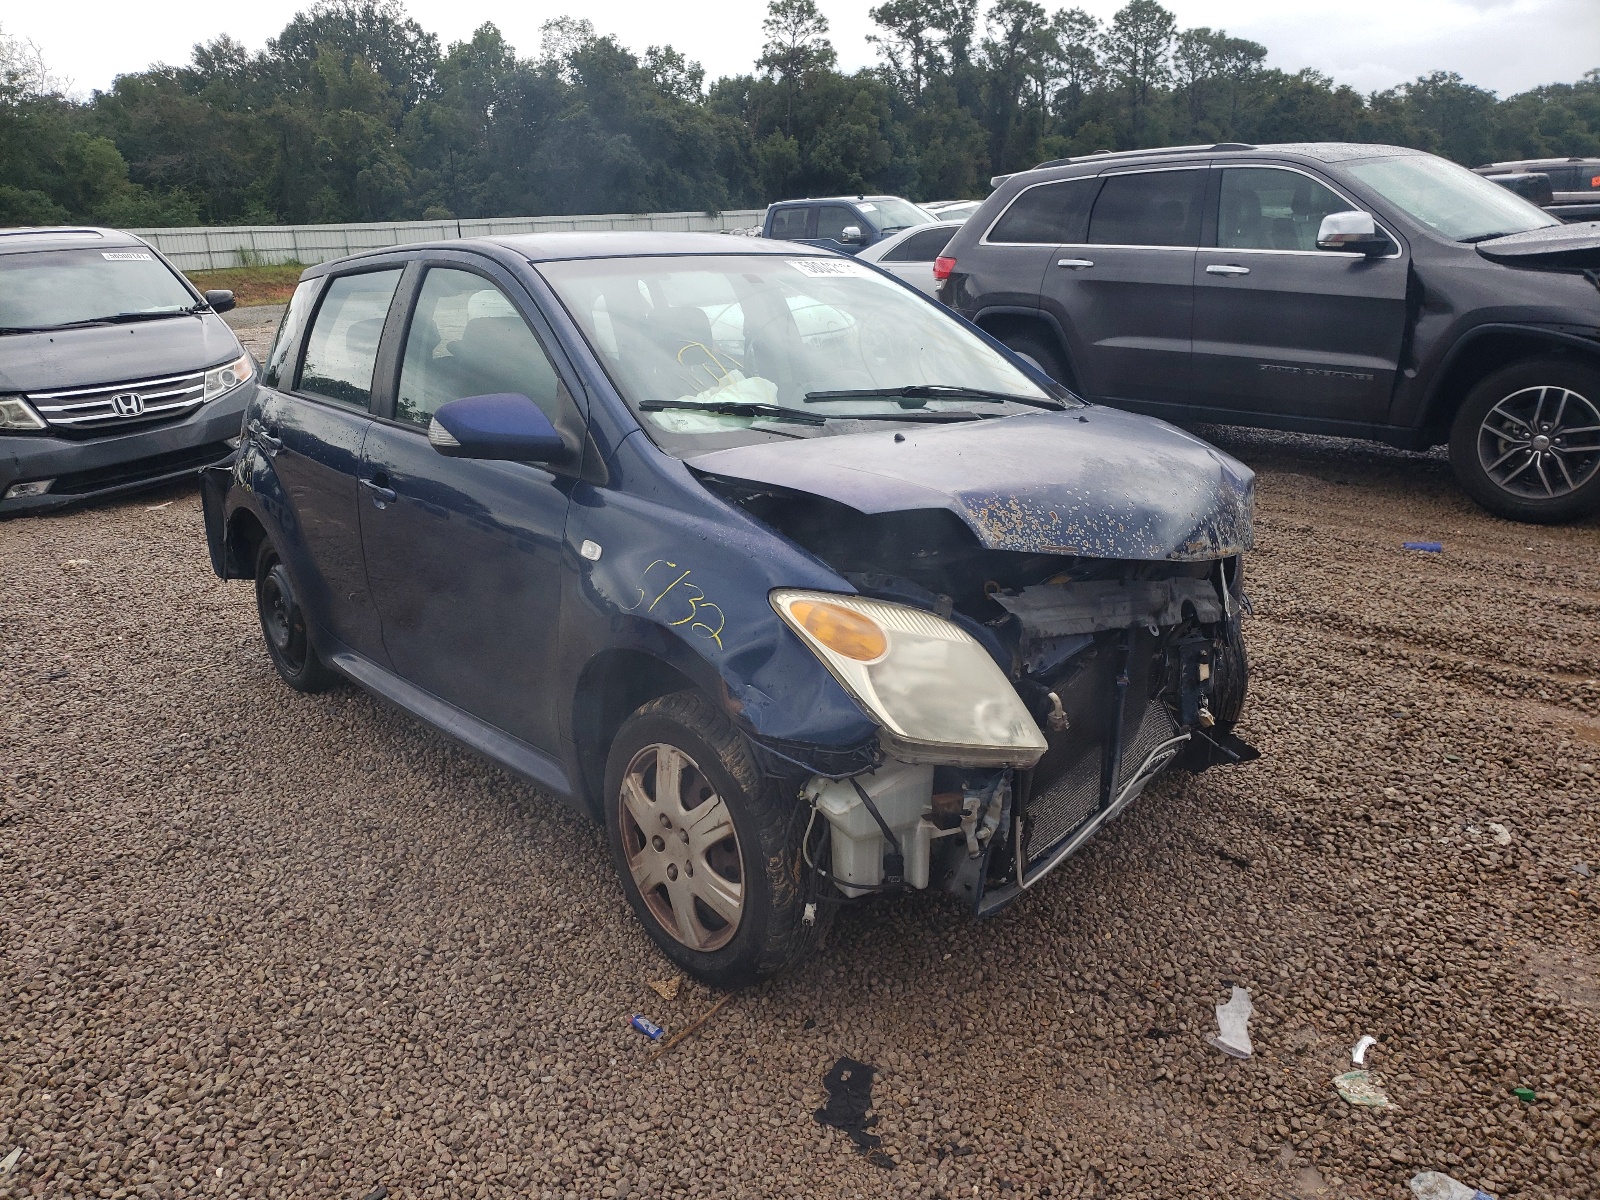 JTKKT624260****** Salvage and Wrecked 2006 Scion xA in AL - Theodore